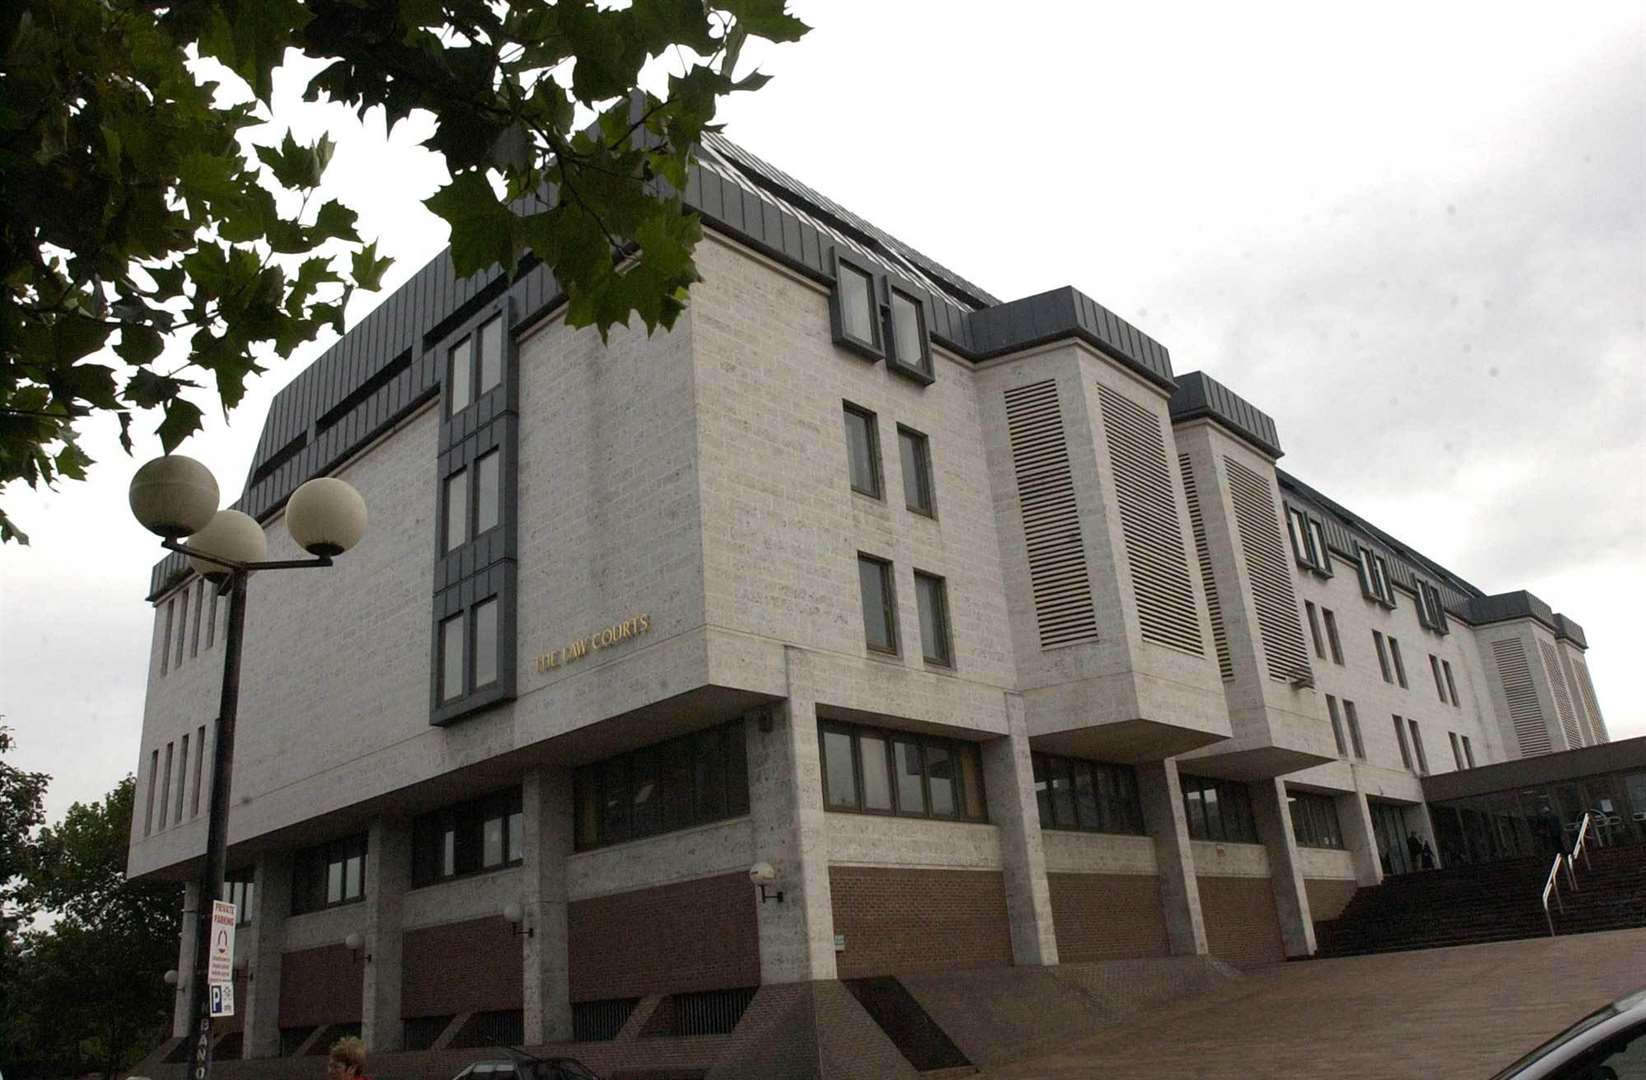 Rossiter was sentenced at Maidstone Crown Court